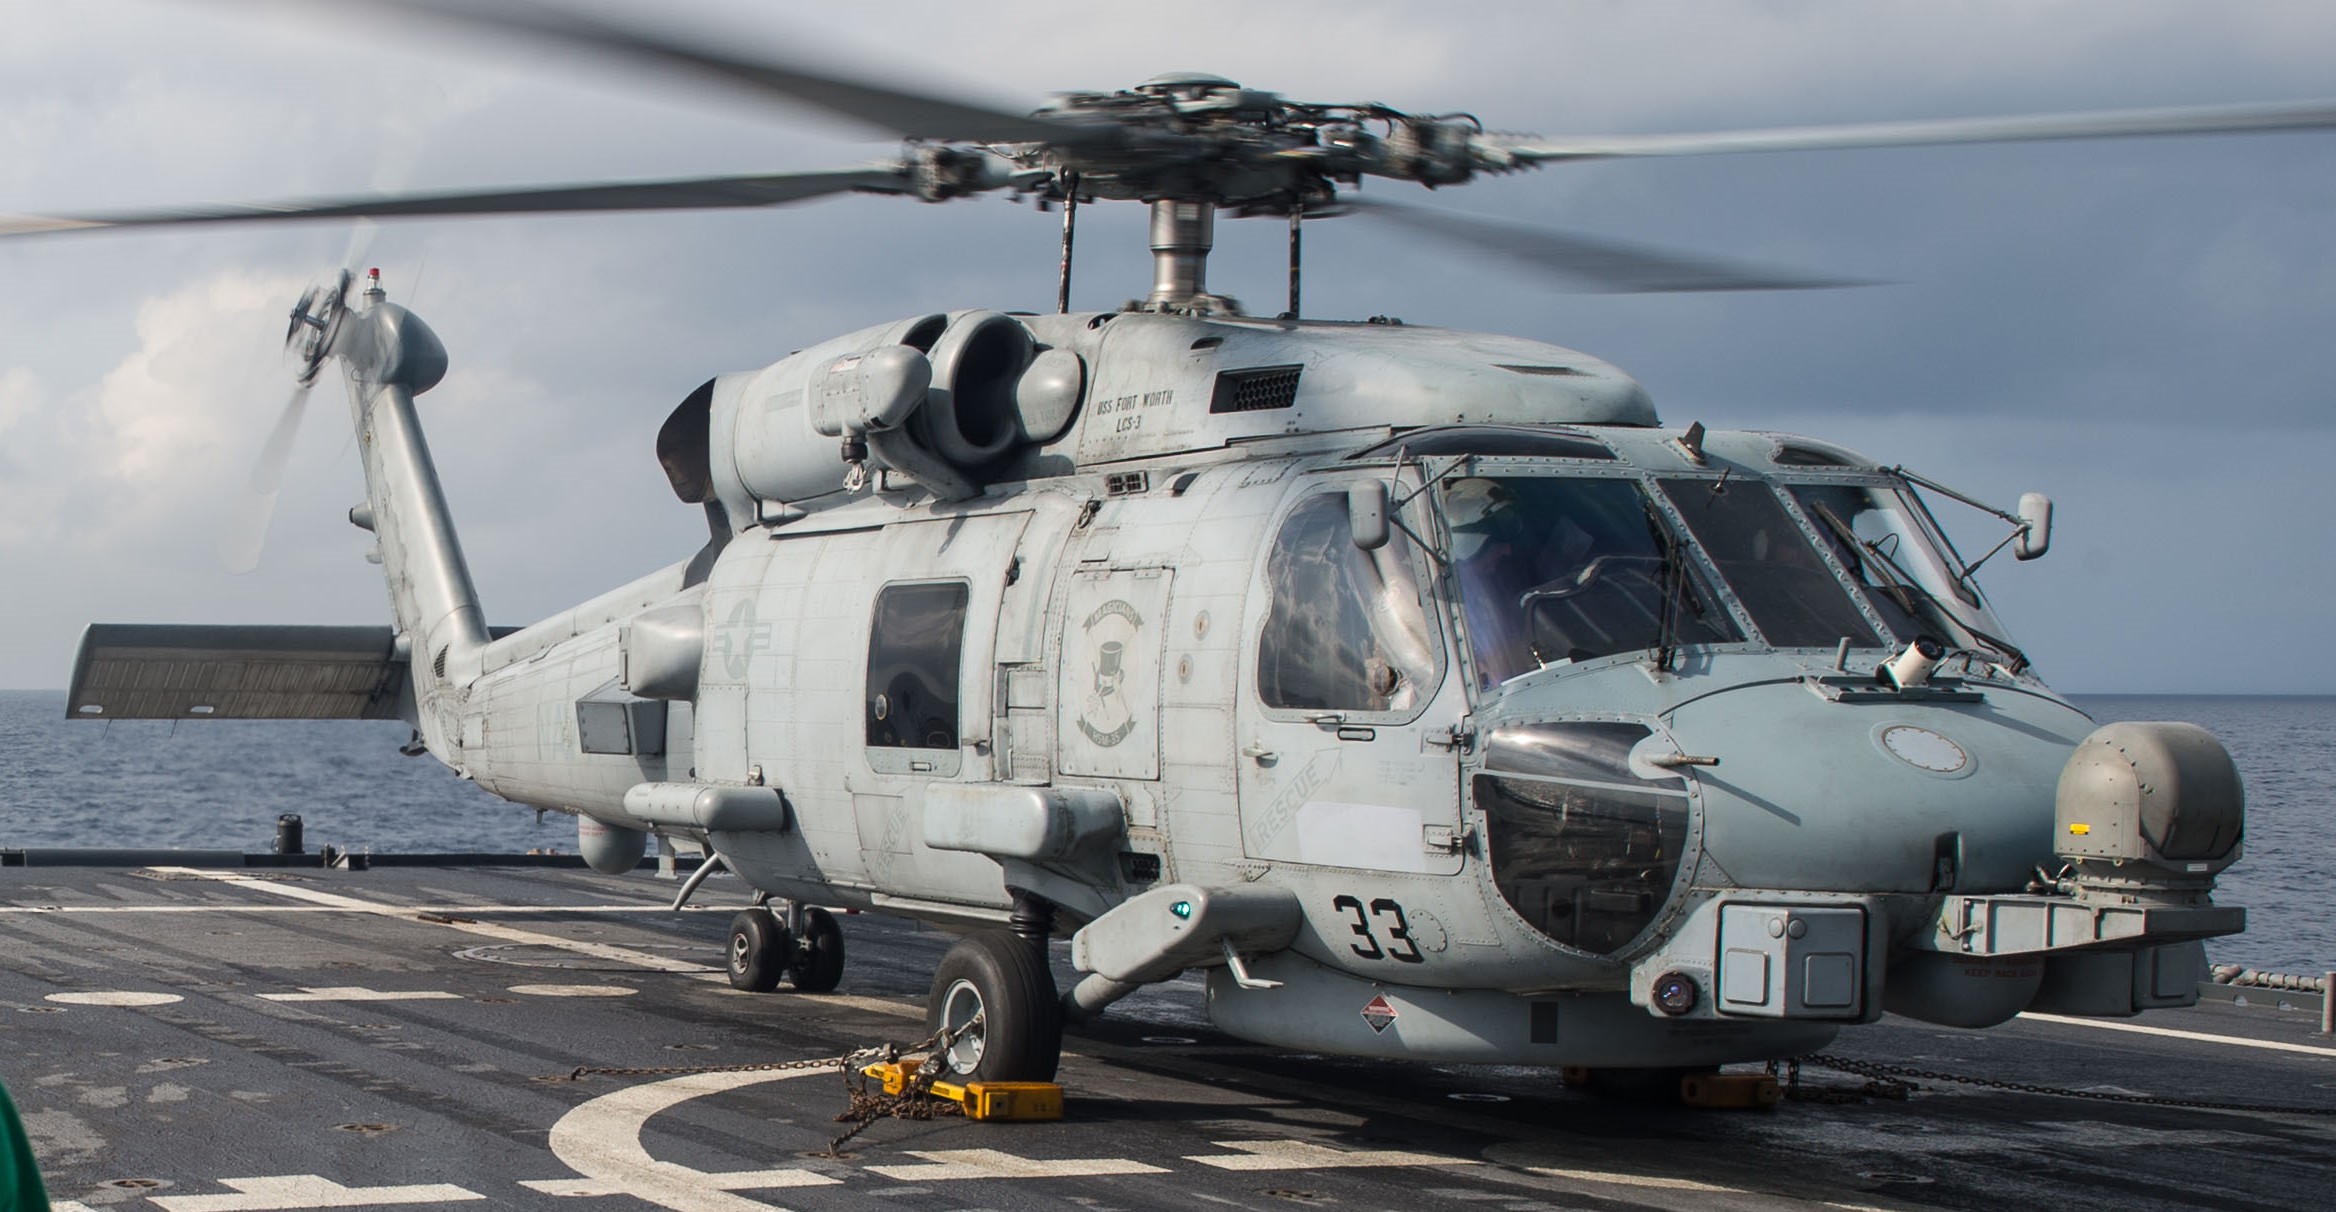 hsm-35 magicians helicopter maritime strike squadron us navy mh-60r seahawk 11x nas north island uss